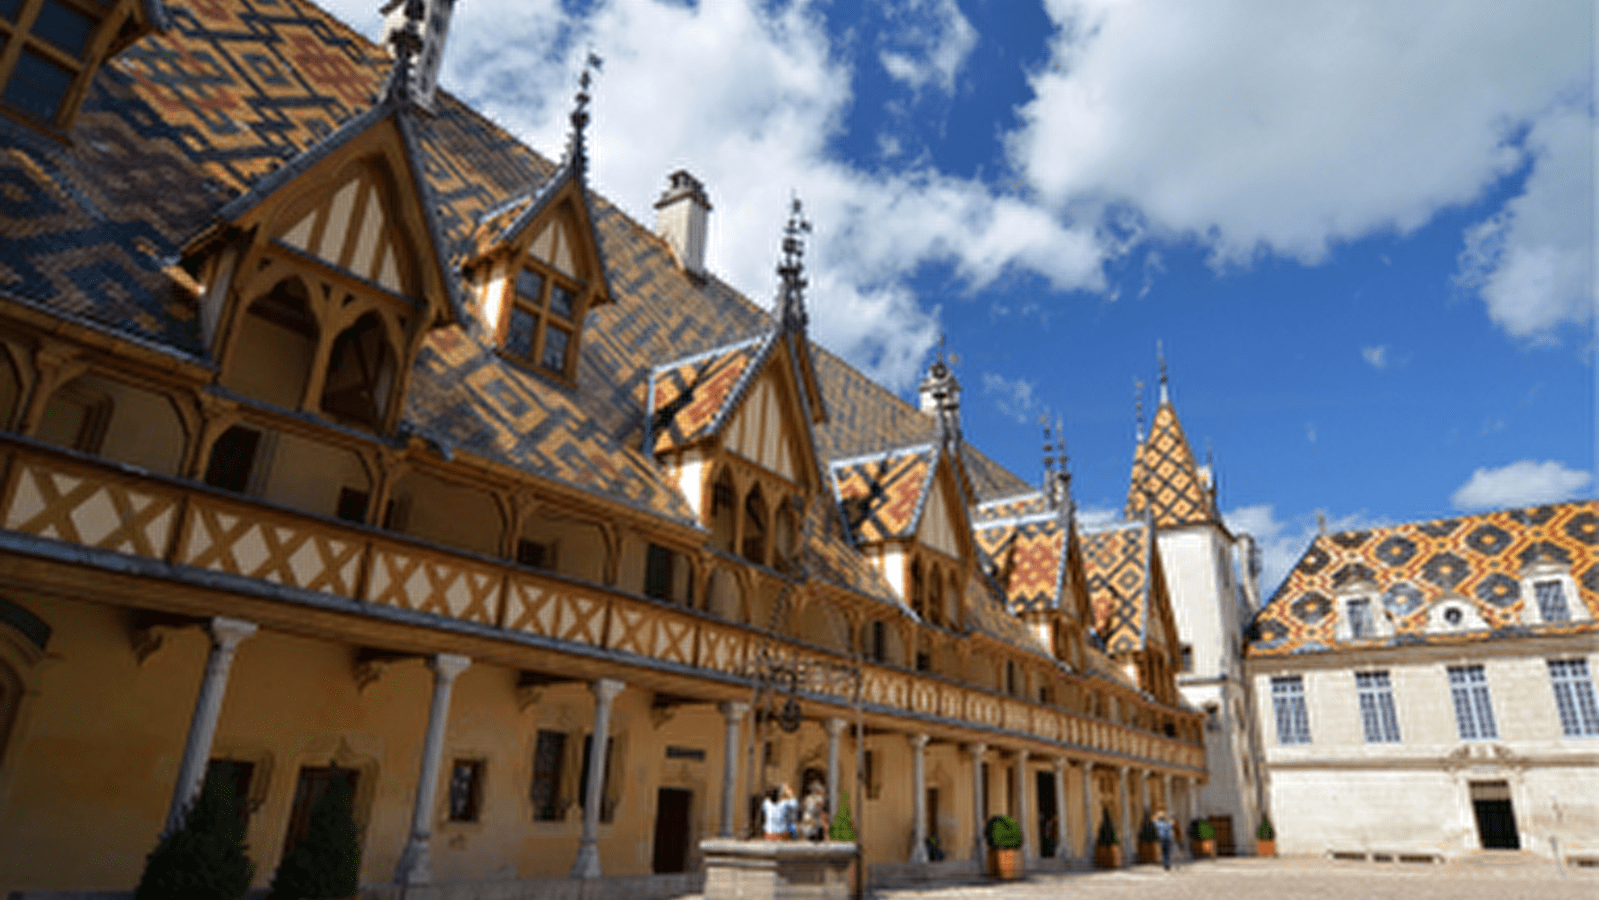 Discovering the vineyards and canals of Burgundy